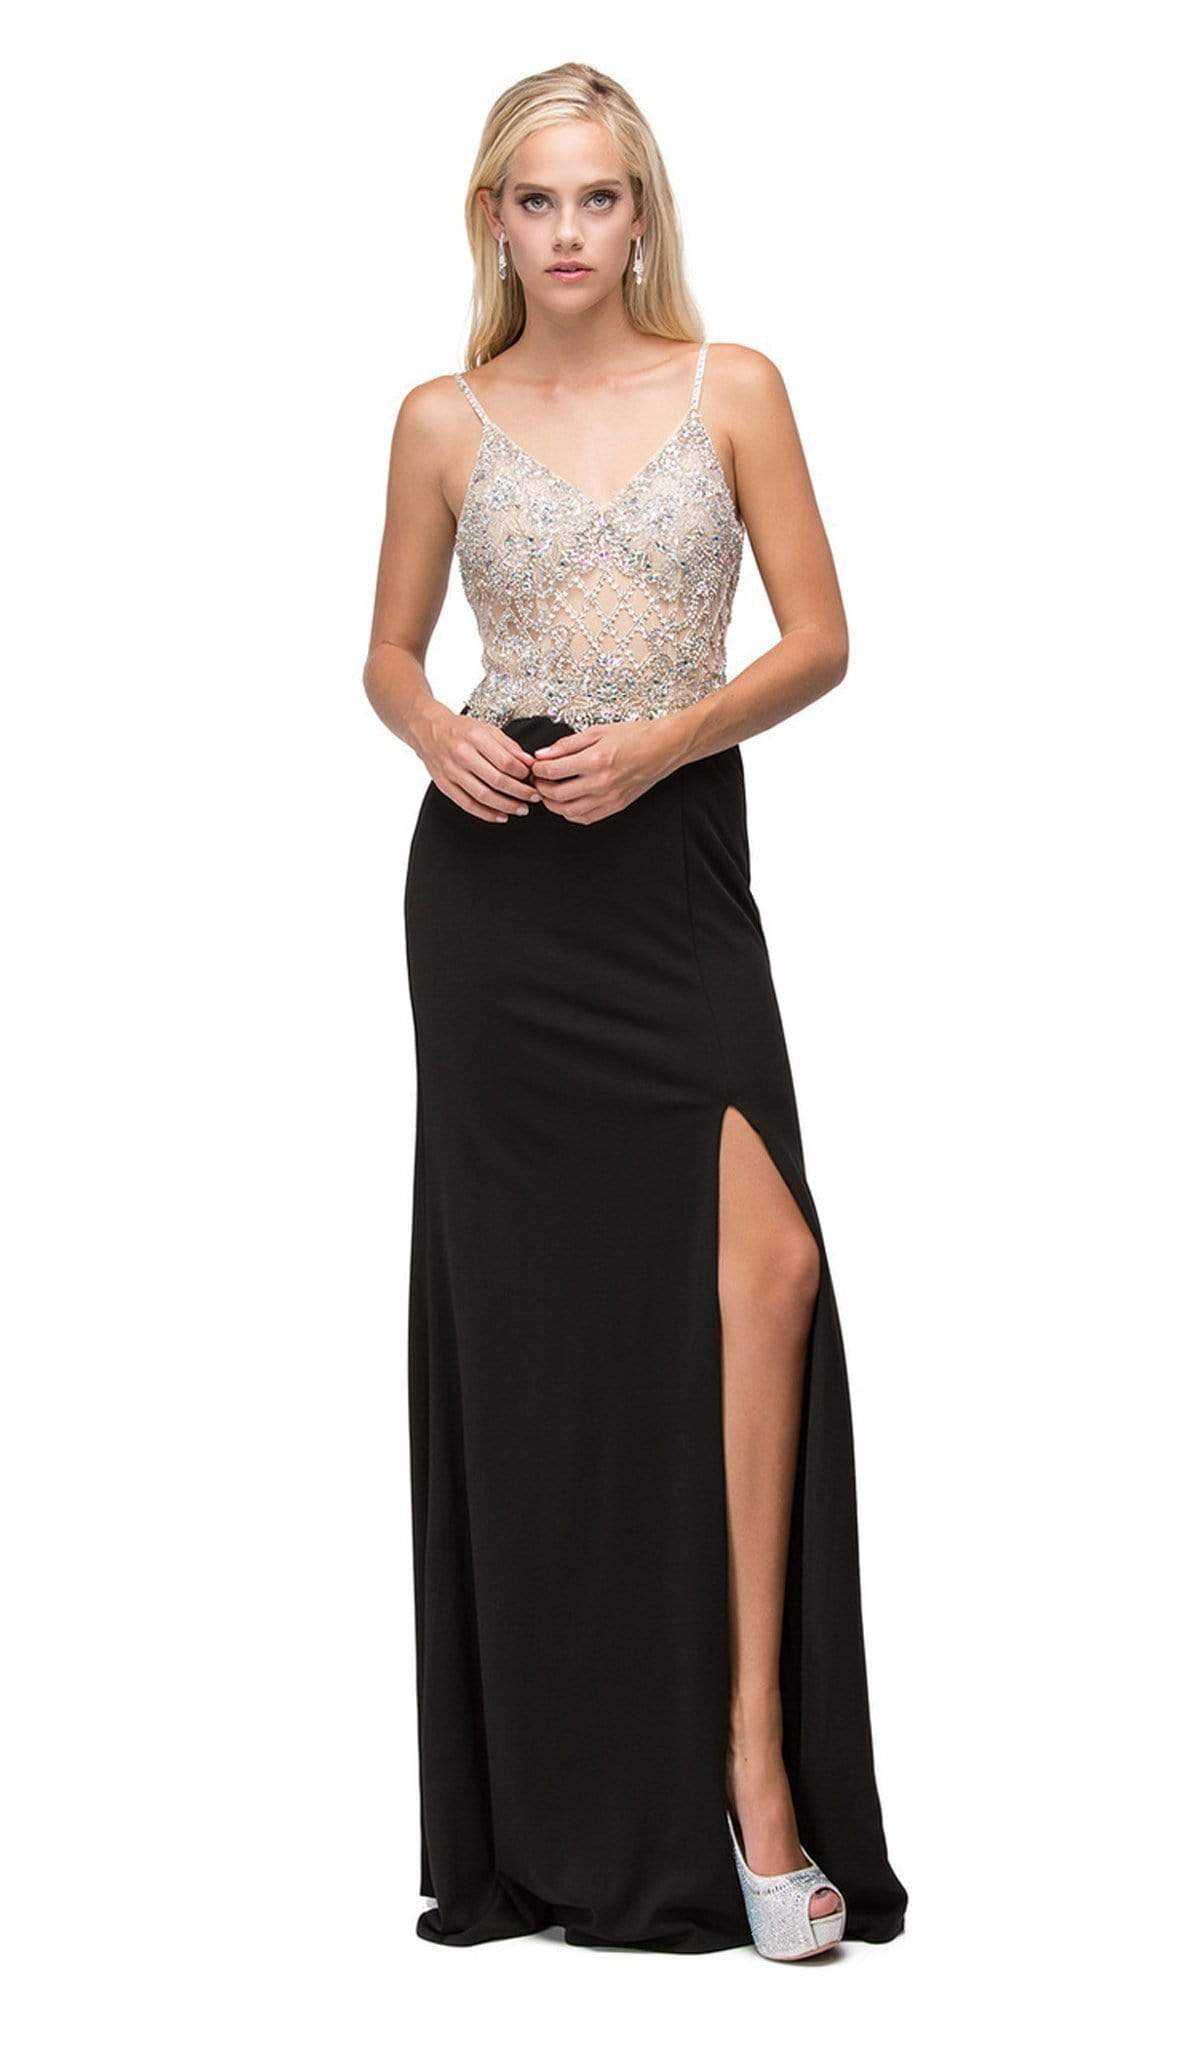 Dancing Queen - 9650 Sheer Jewel Embellished Bodice Evening Dress Special Occasion Dress XS / Black